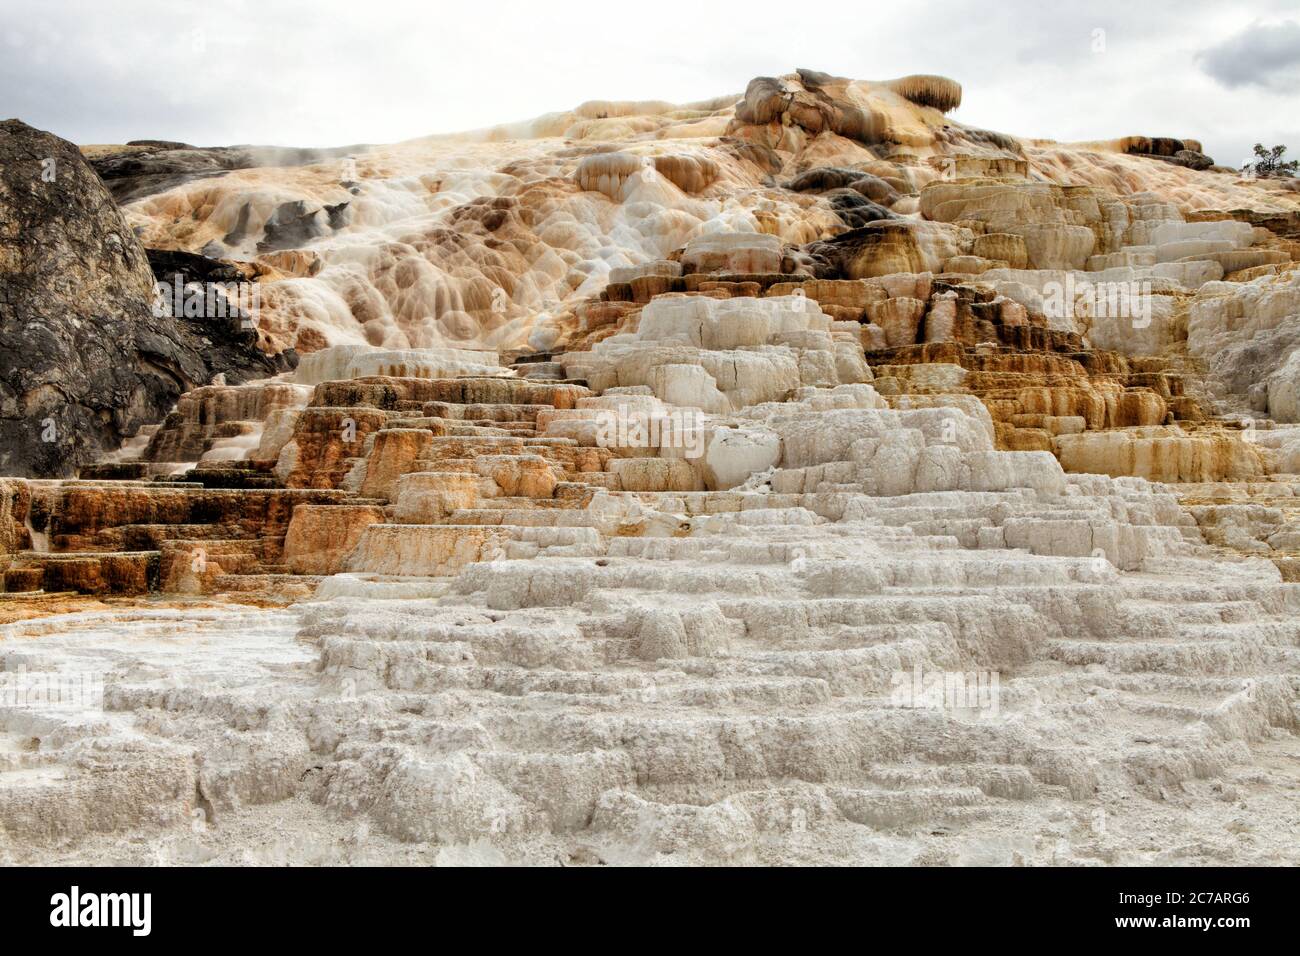 The tiers of travertine at Mammoth Hot Springs in Yellowstone National Park. Stock Photo